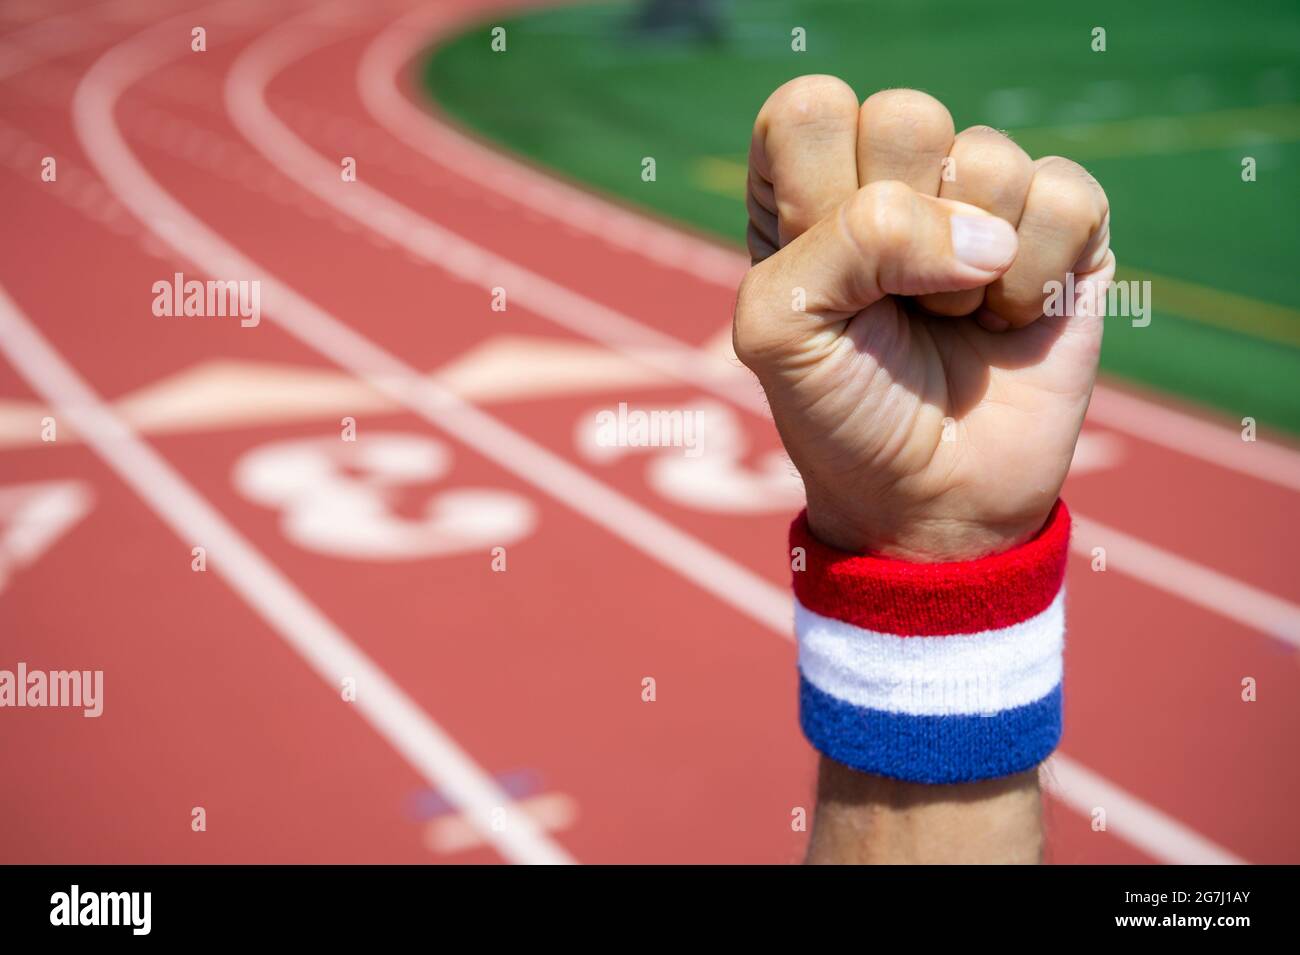 Athlete  with red, white and blue wristband punches the air in front of a sports track background Stock Photo